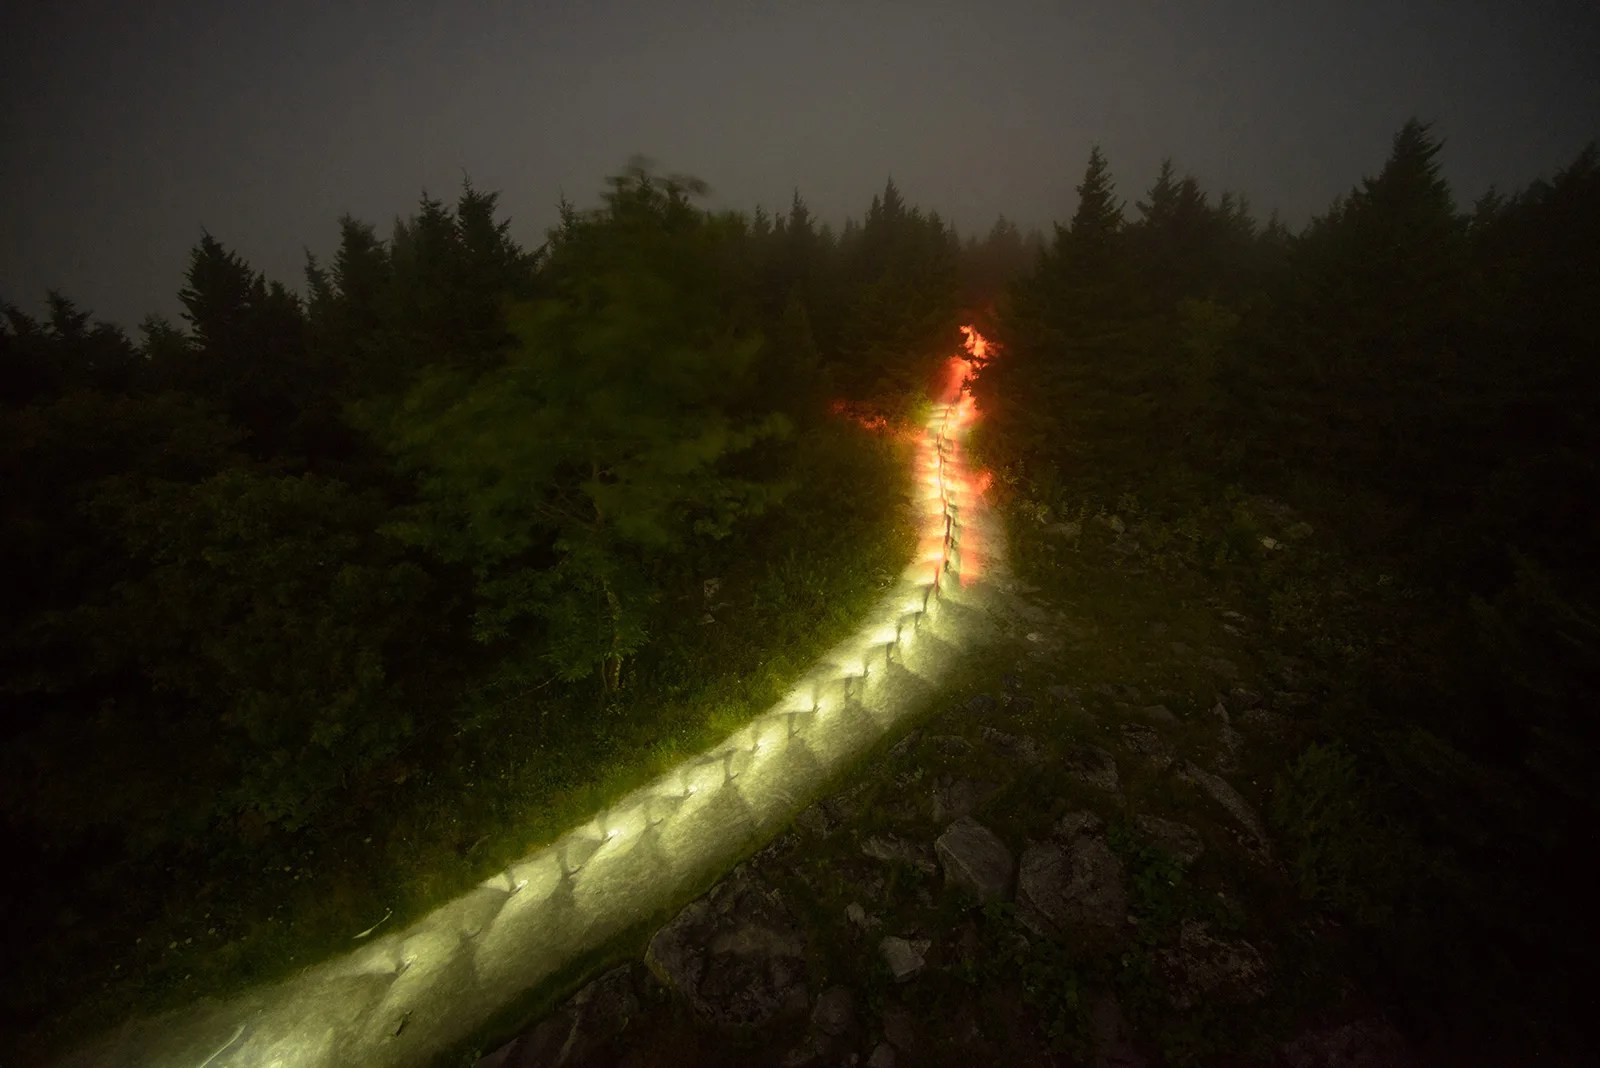 Light trail made by hikers going up a mountain in the dark.